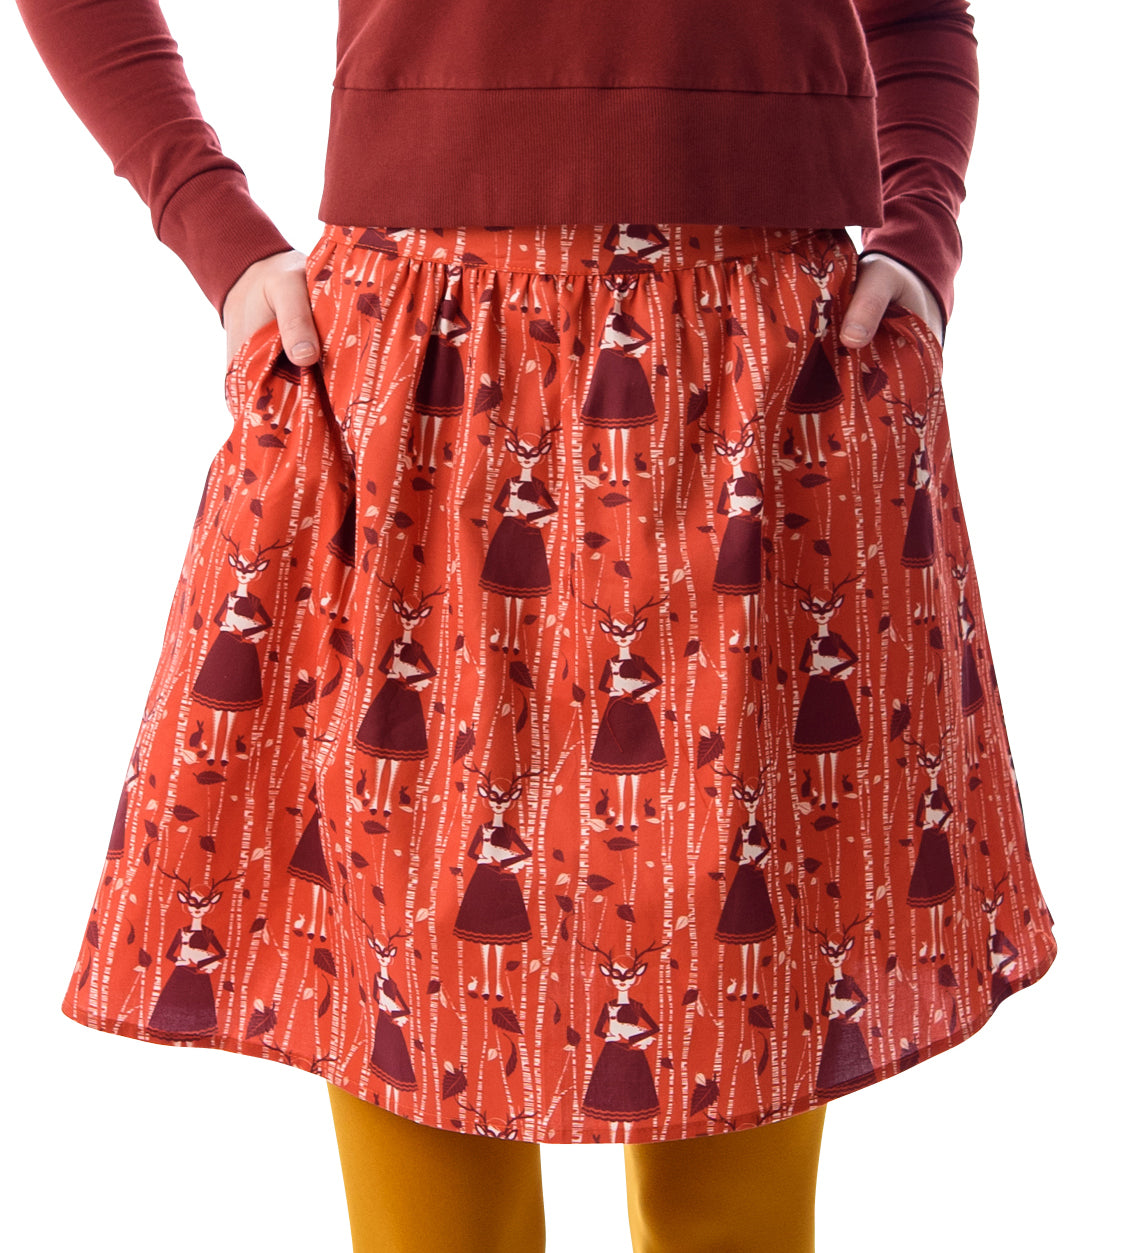  Orange and brown skirt with deer, birches and masked girl print and pockets